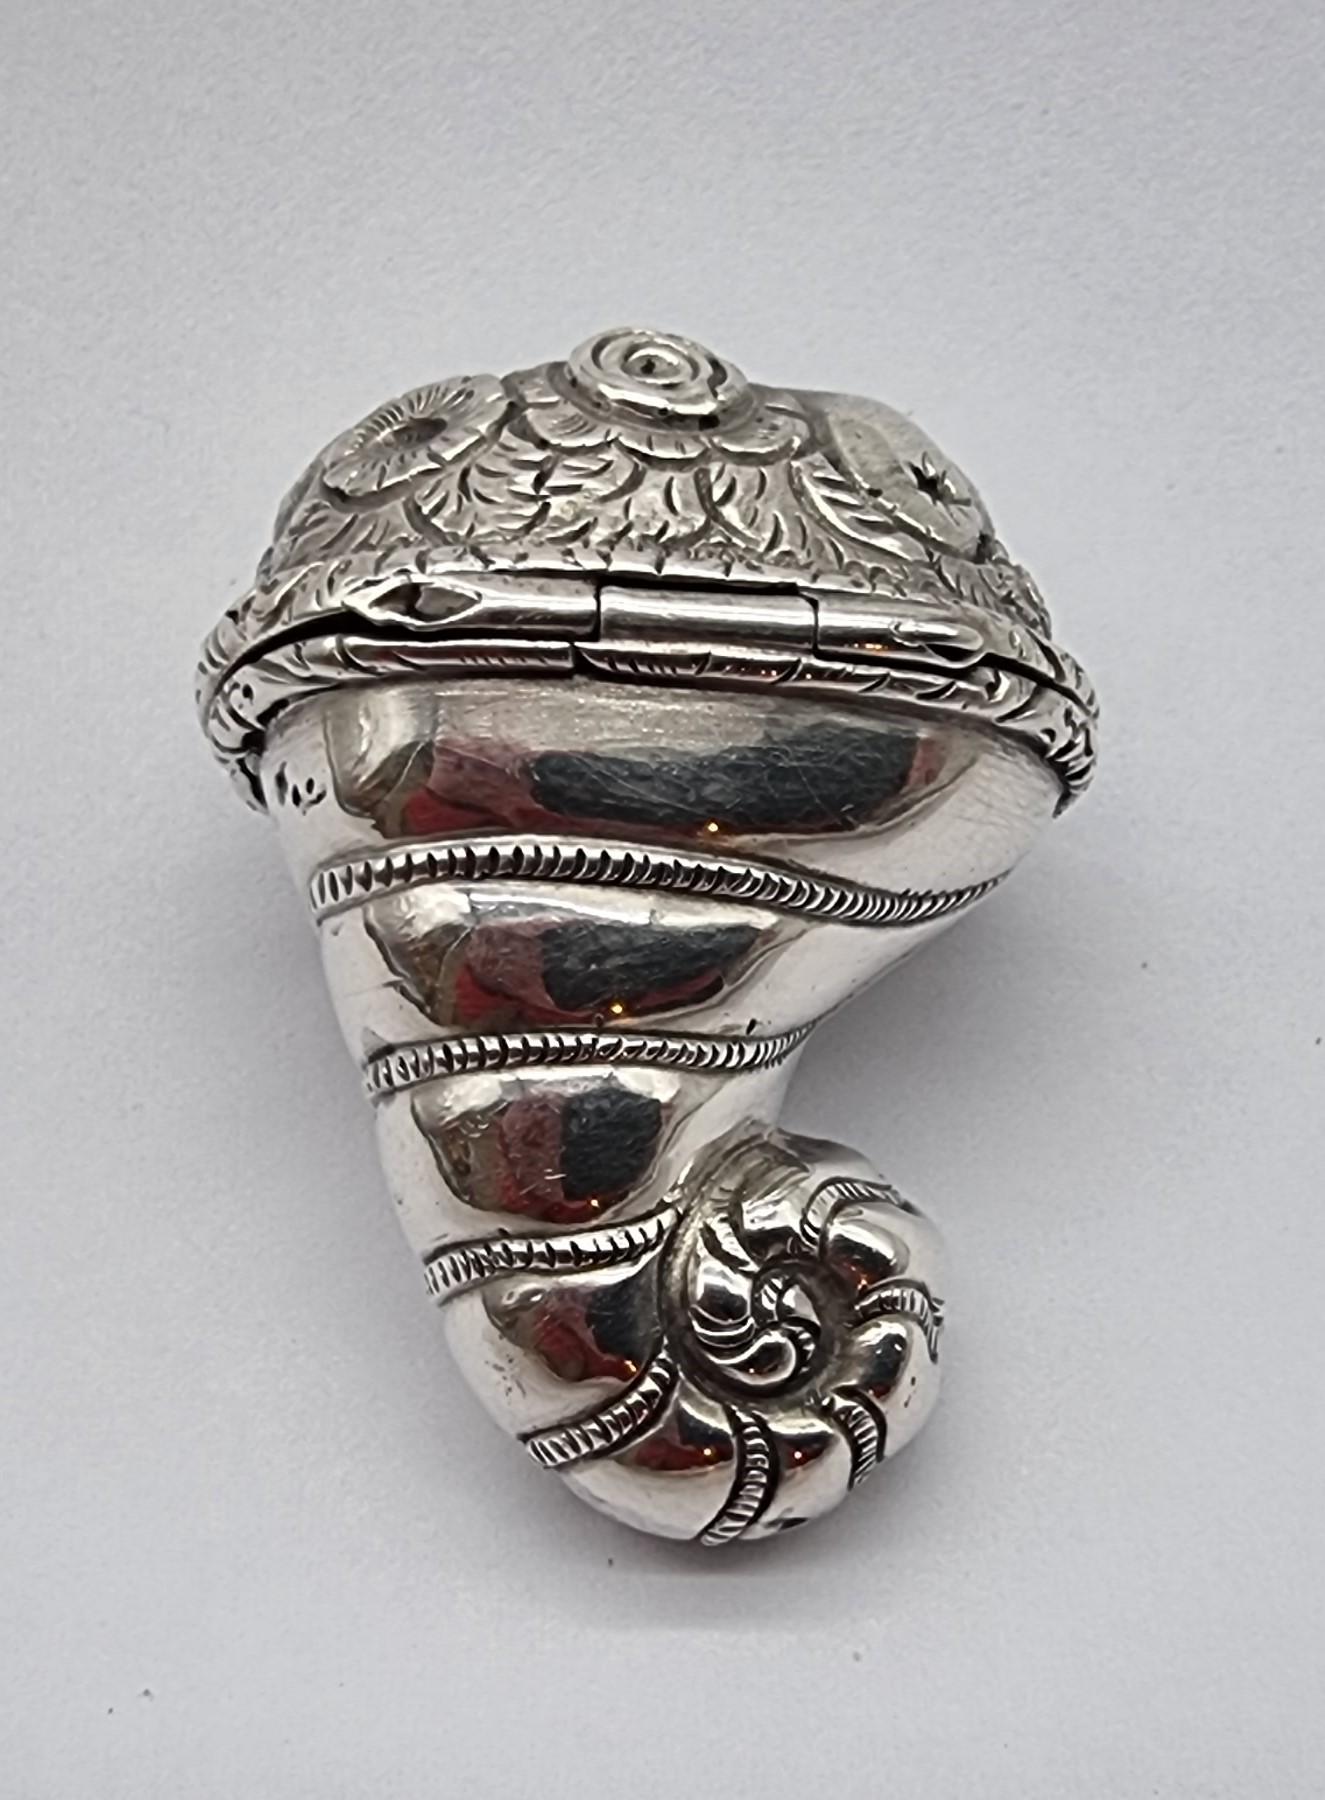 An extremely rare early 19th C Georgian silver vinaigrette modelled as a cornucopia hallmarked for Birmingham and most likely by the silversmith John Bettridge.

This very rare novelty Georgian silver vinaigrette is superbly modelled as a classical